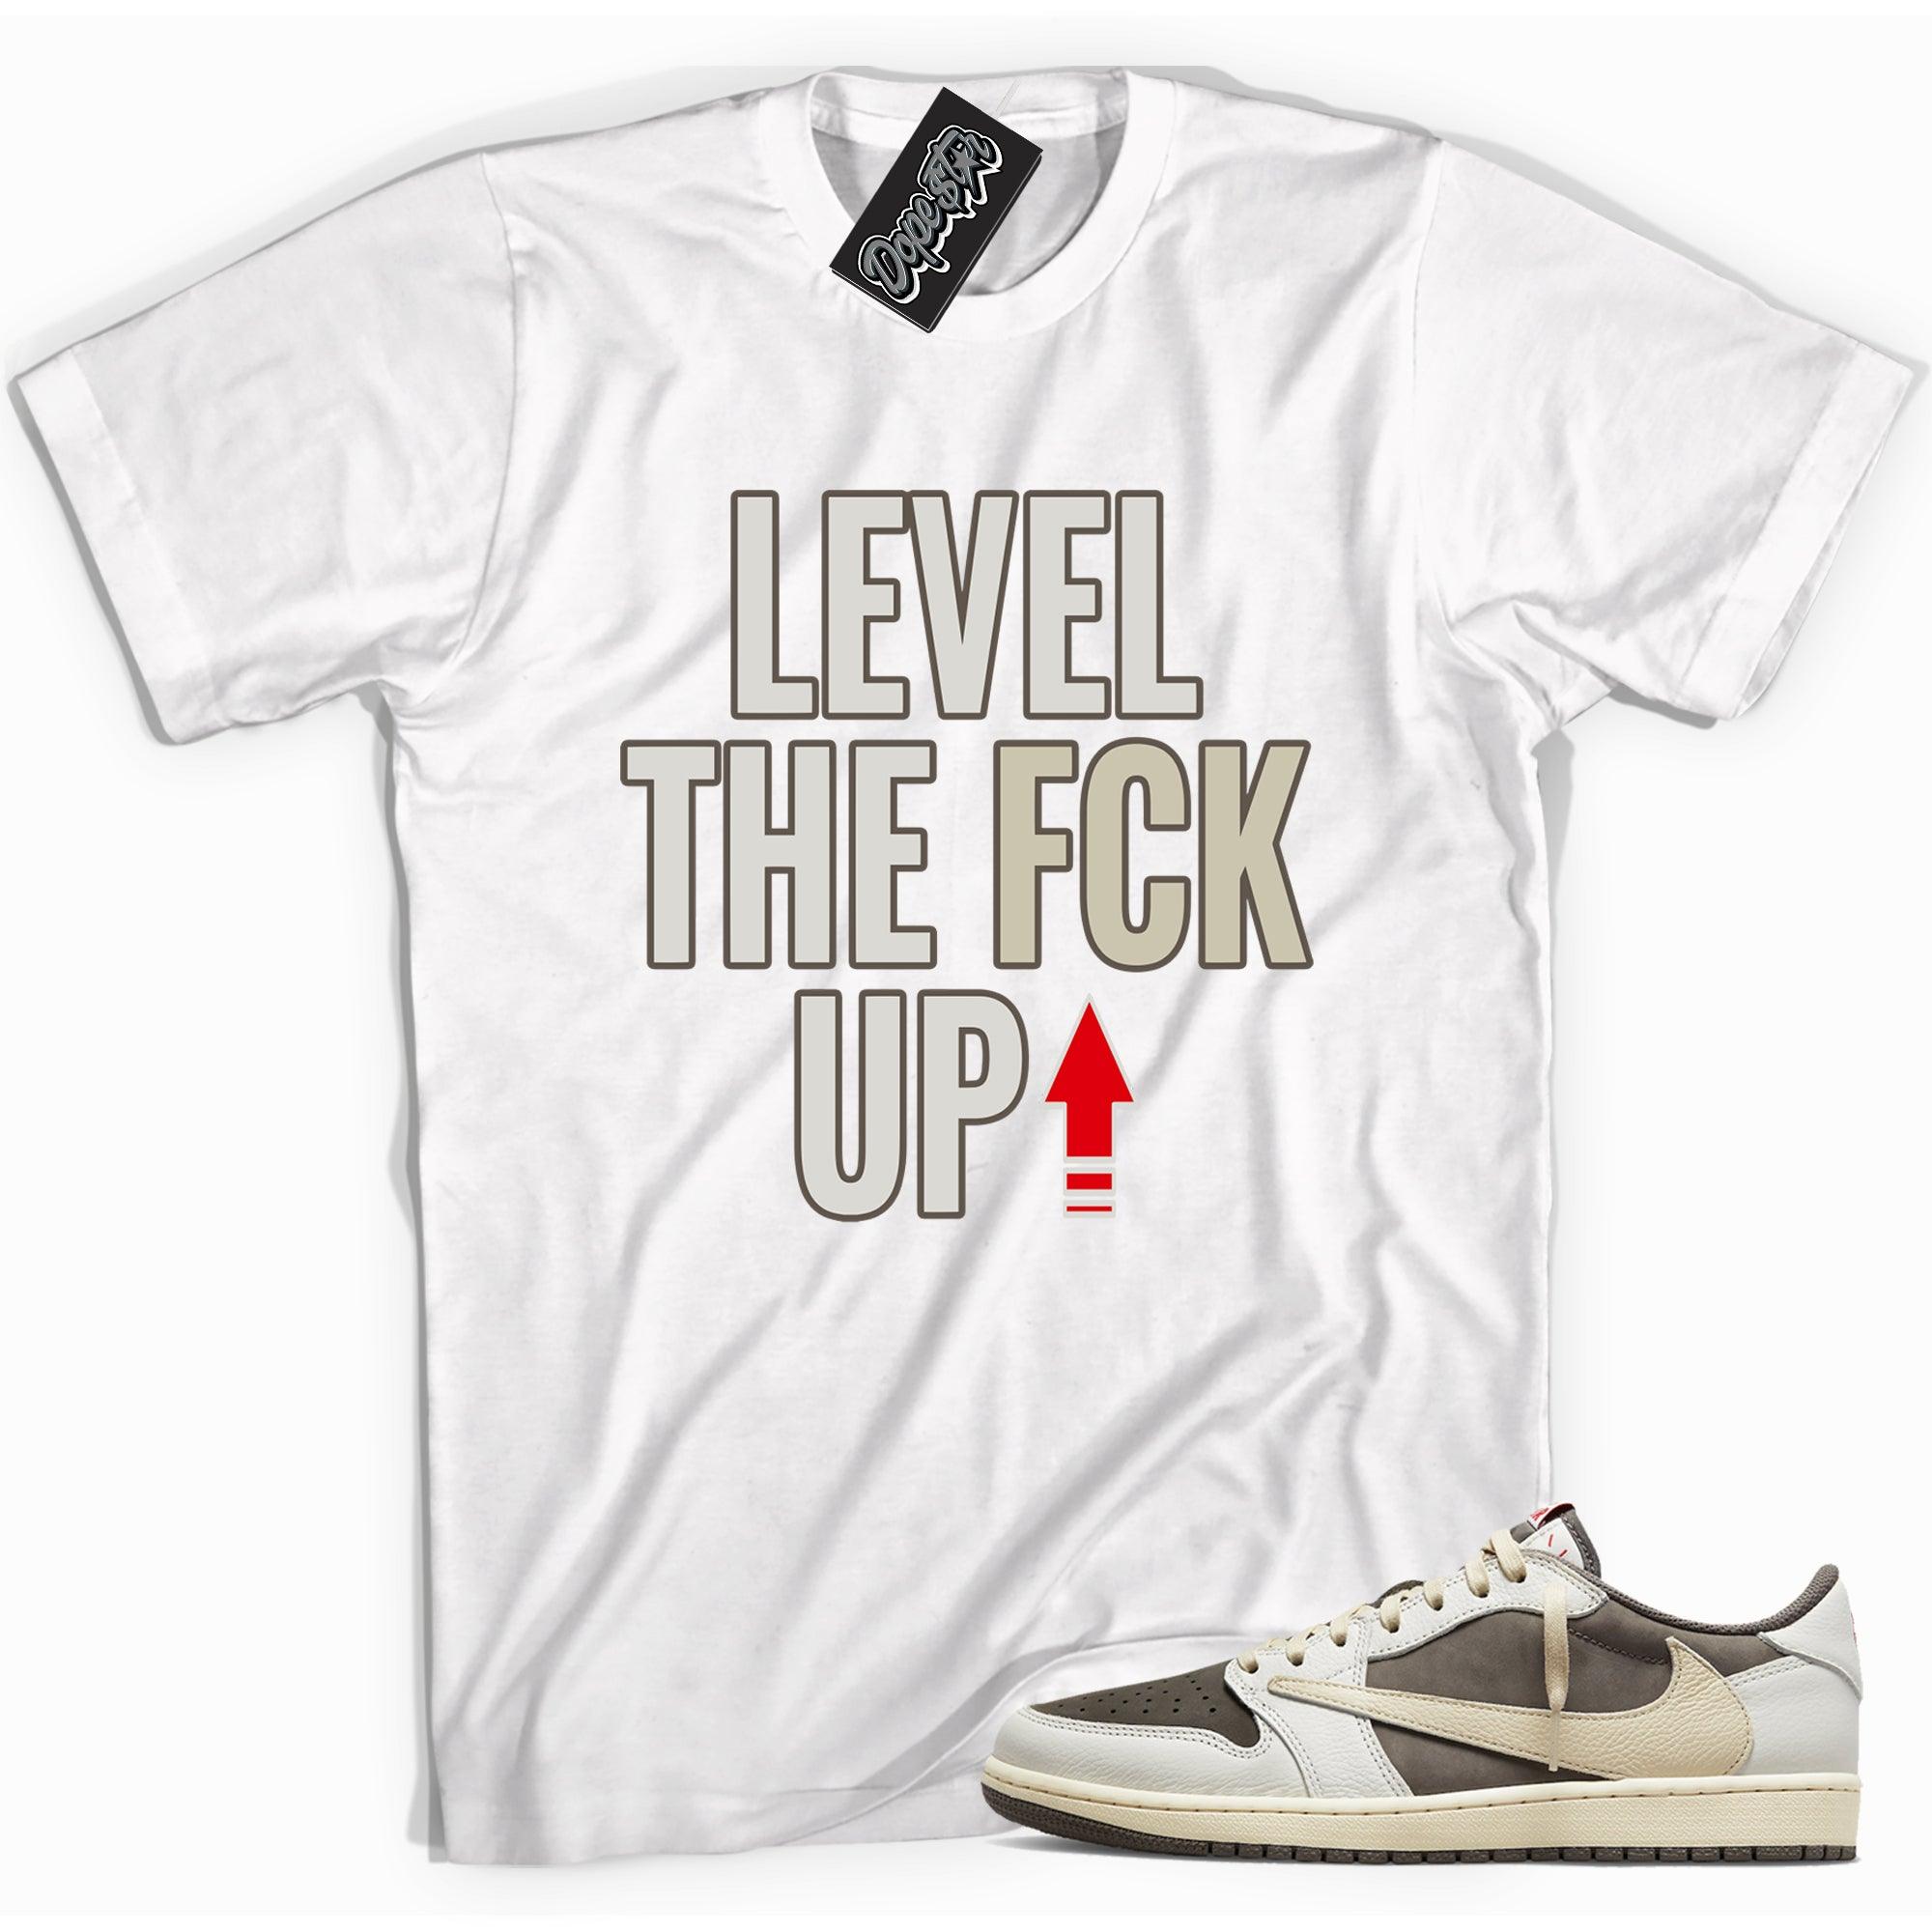 Cool white graphic tee with 'Level Up' print, that perfectly matches Travis Scott's Air Jordan 1 Low 'Reverse Mocha sneakers.